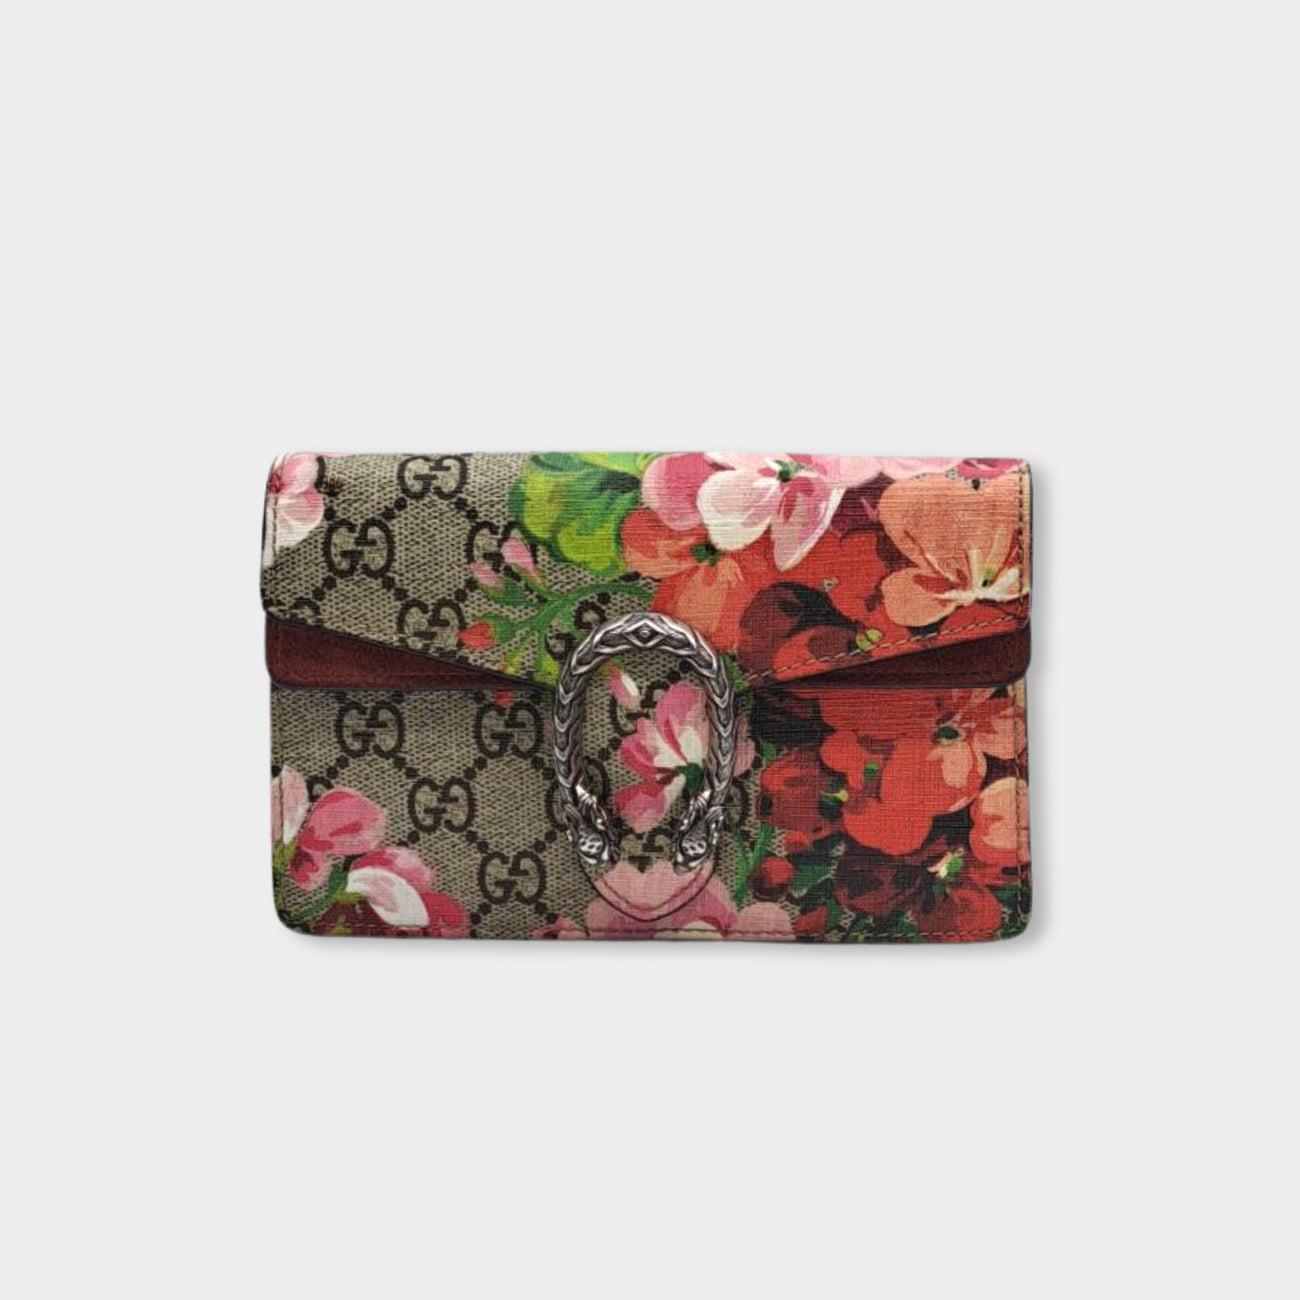 Gucci - Authenticated GG Blooms Purse - Multicolour Floral for Women, Never Worn